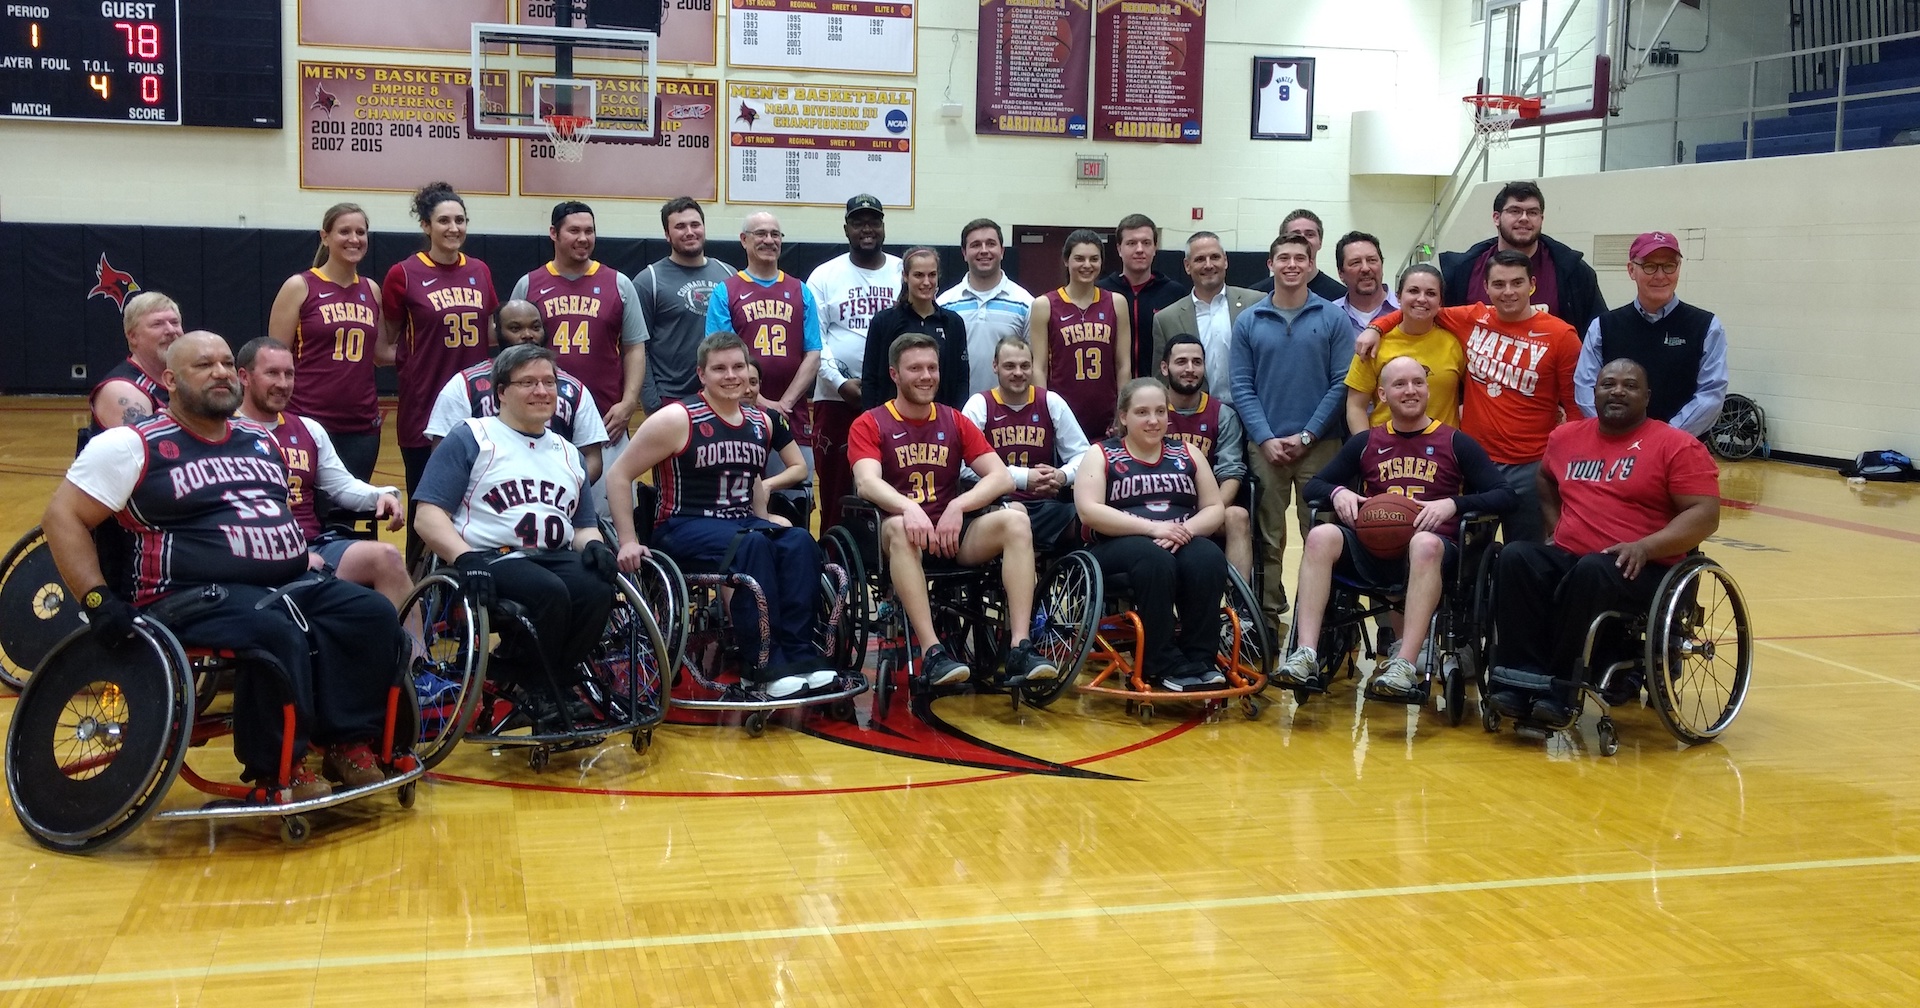 A large group of students with Fisher jerseys stands behind a group of athletes in sports chairs wearing "Rochester Wheels" jerseys; gym walls posted with school sports information